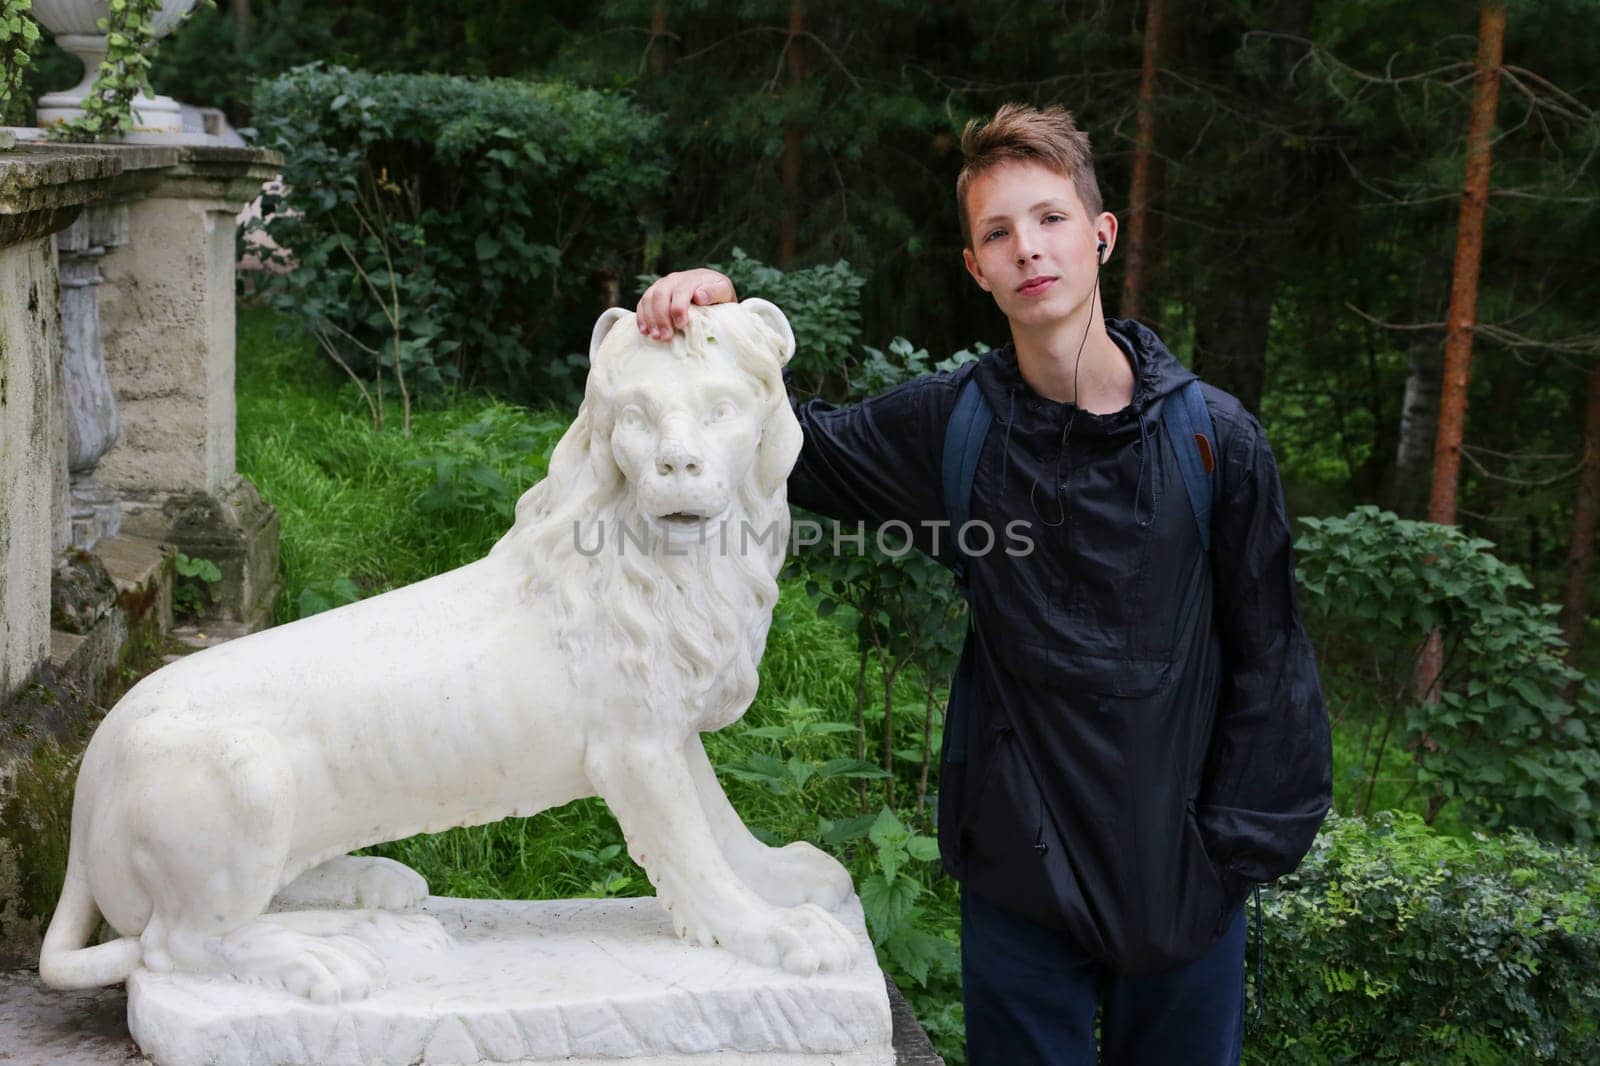 A handsome and cheerful boy, age 14-17, stands near a white stone lion statue against a green backdrop. The boy in blue clothes is leaning his hand on the lion statue.